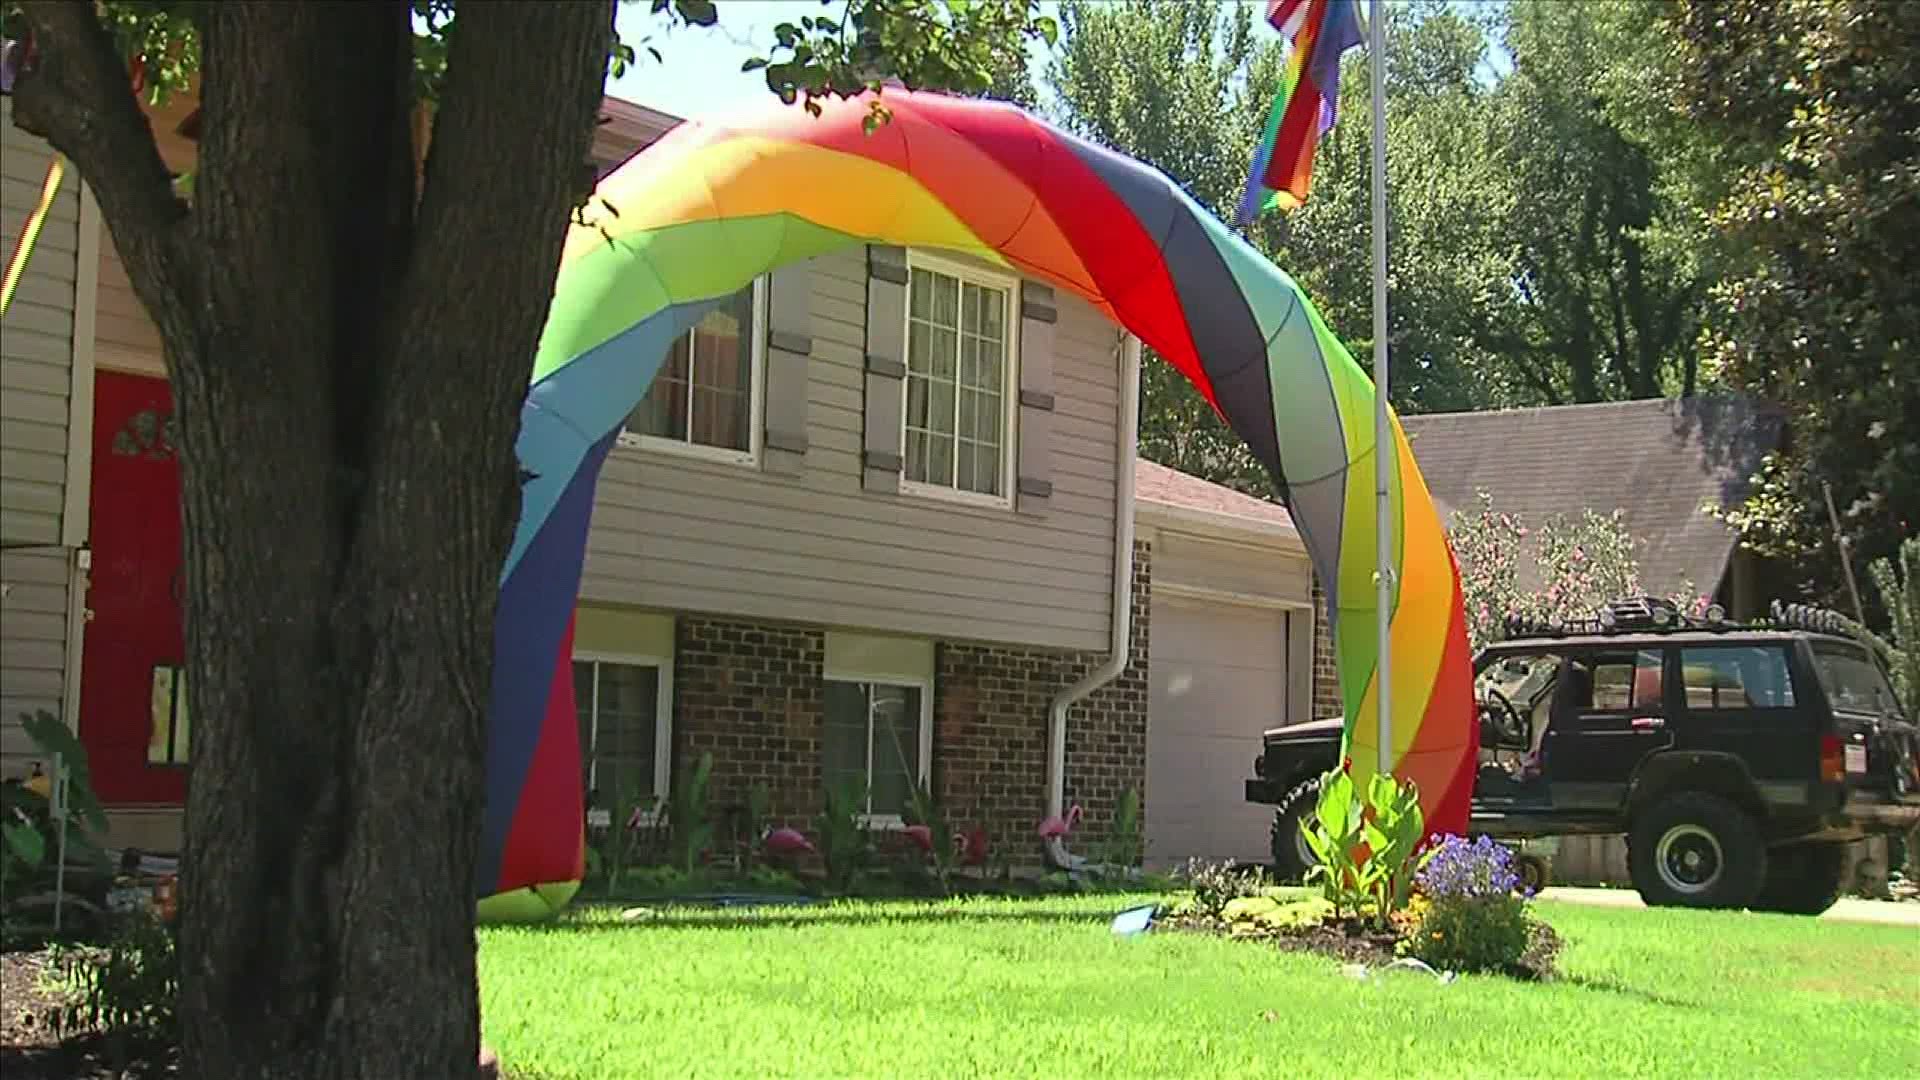 Local 24 News Anchor Richard Ransom and his panelists discuss the problem Bartlett had with a homeowner's PRIDE inflatable rainbow and what that was about.